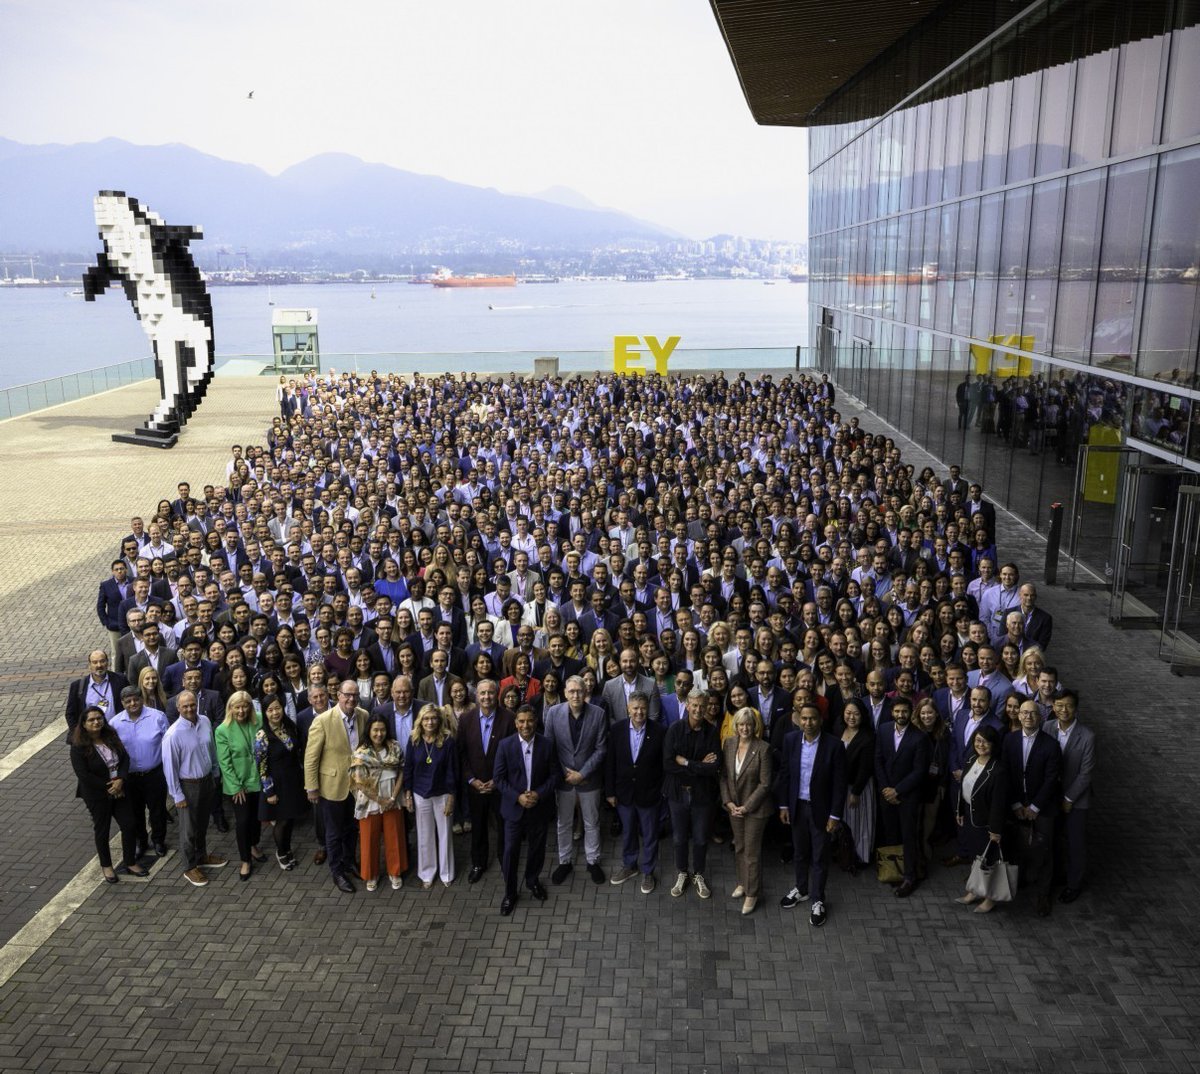 Congratulations to the largest cohort of new EY partners and principals yet. What a privilege to celebrate you all in Vancouver, and recognize this milestone as you continue build a #BetterWorkingWorld.